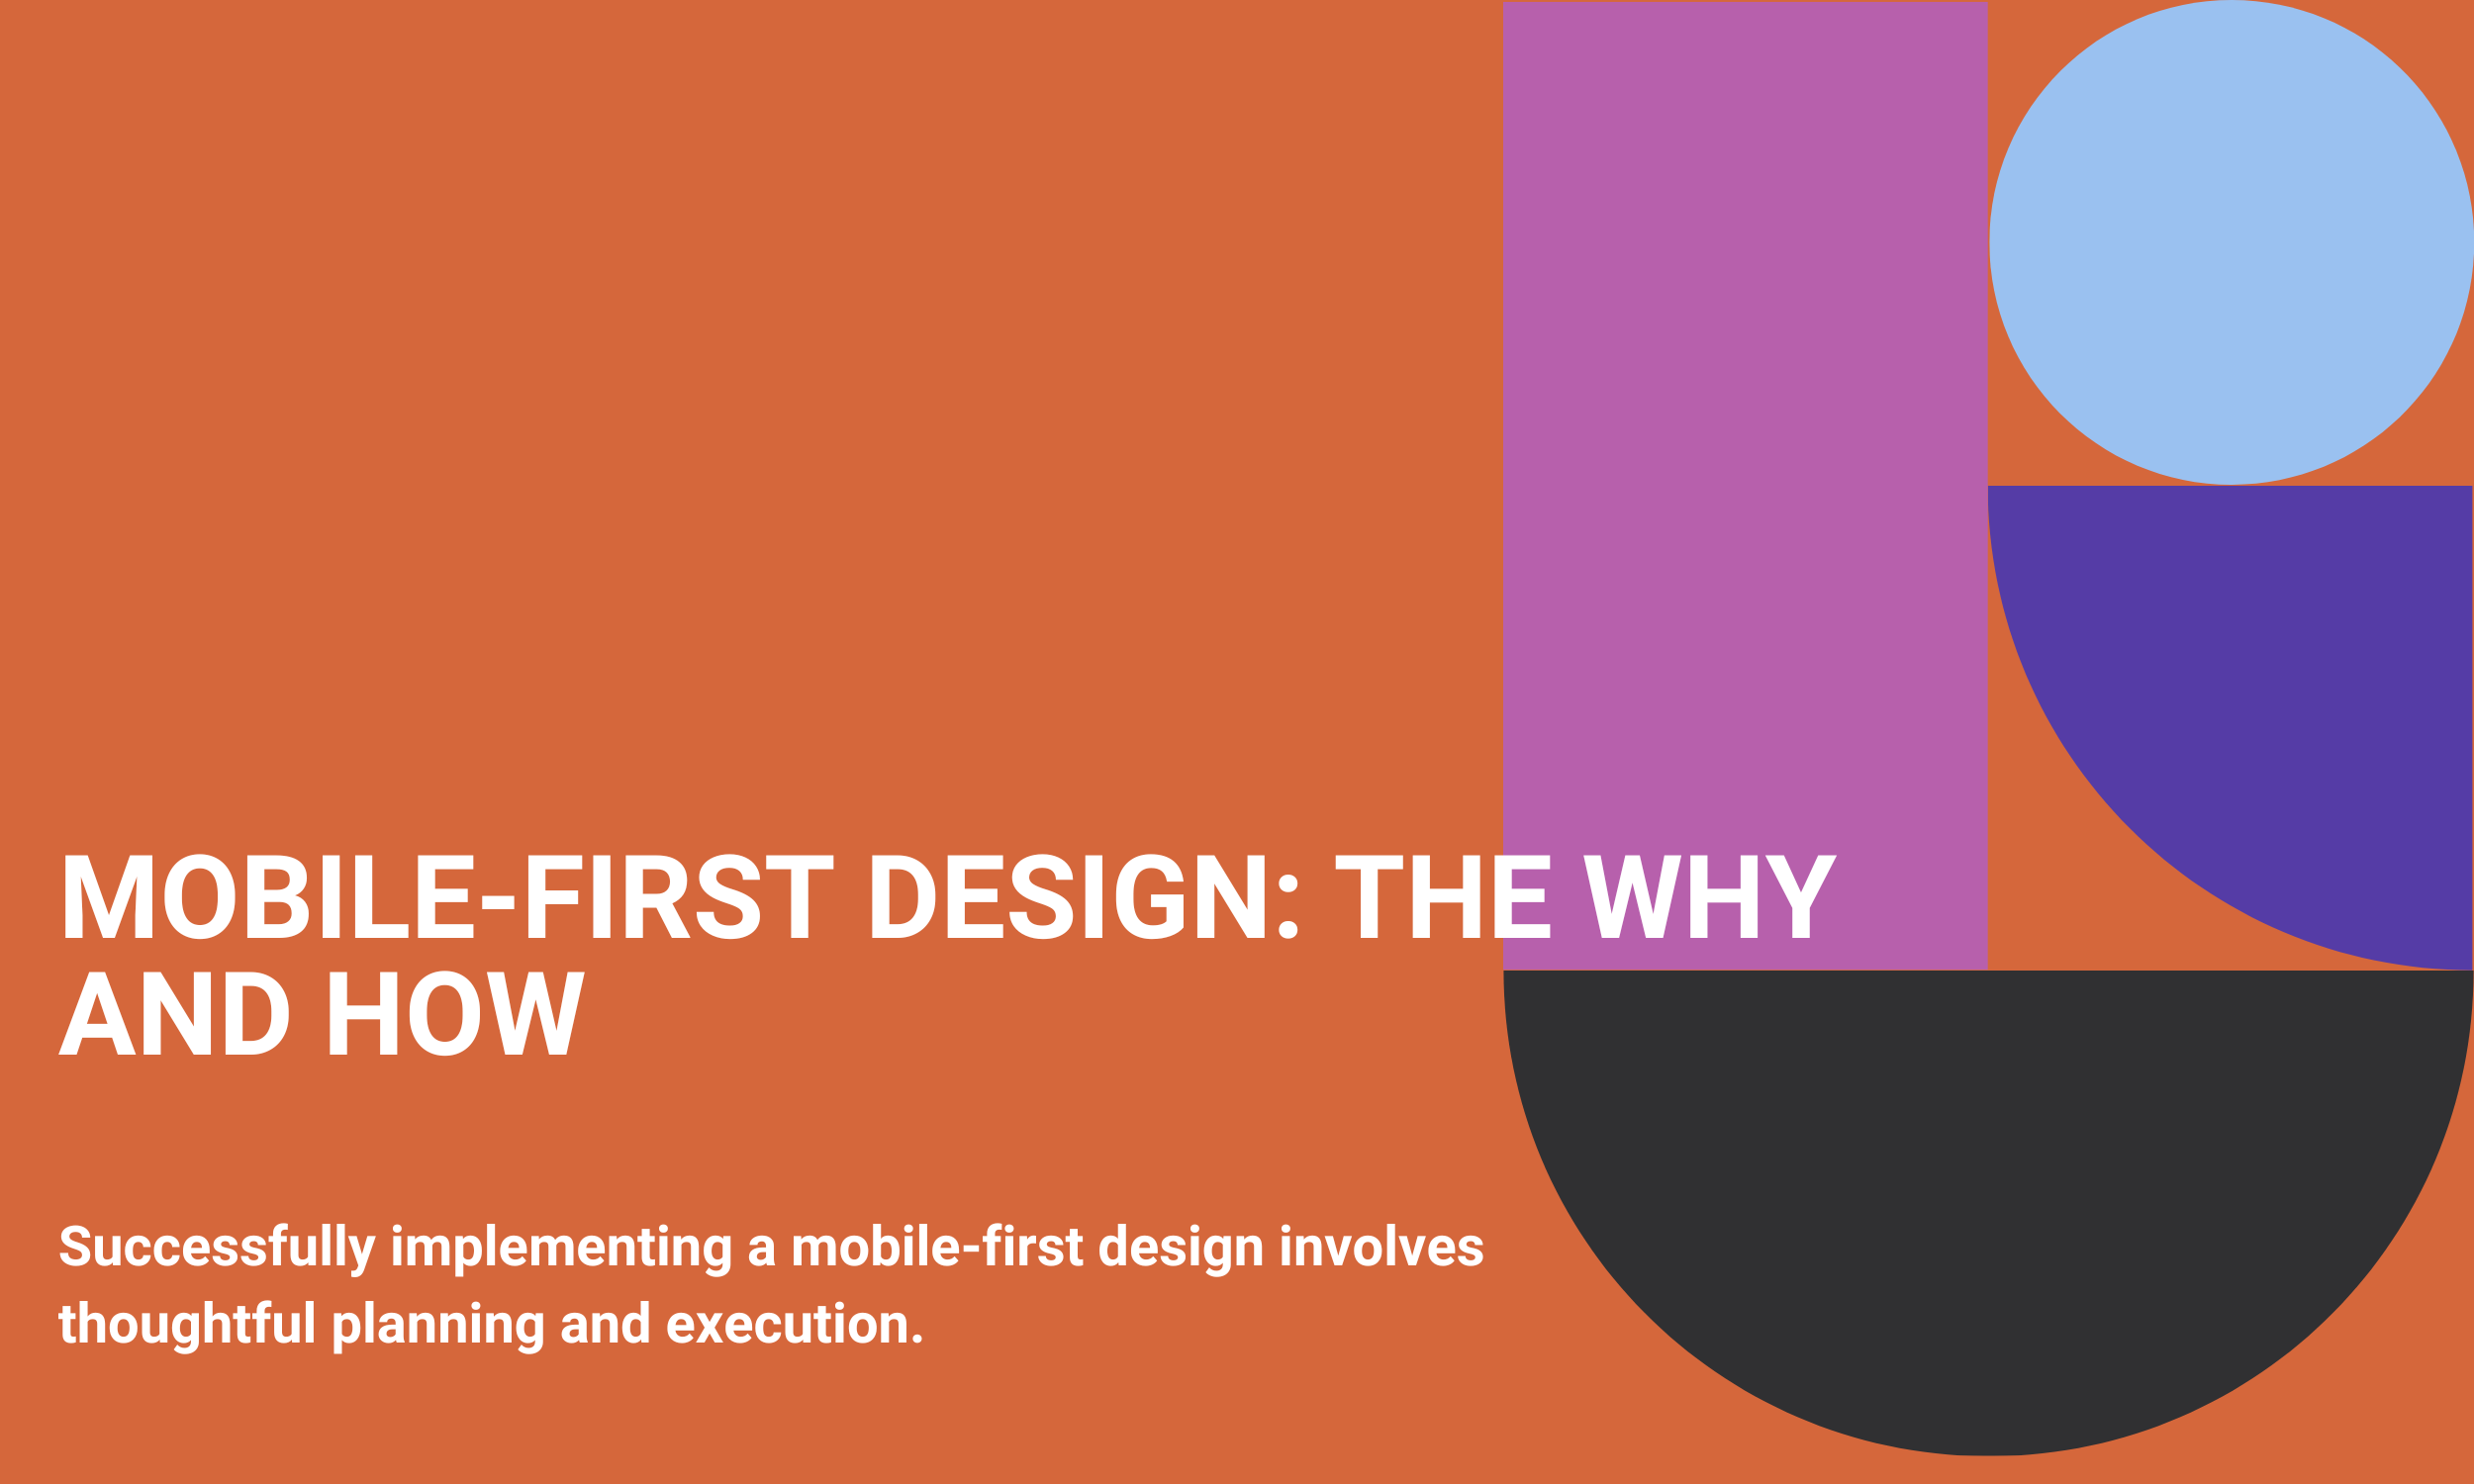 Mobile-First Design: The Why and How